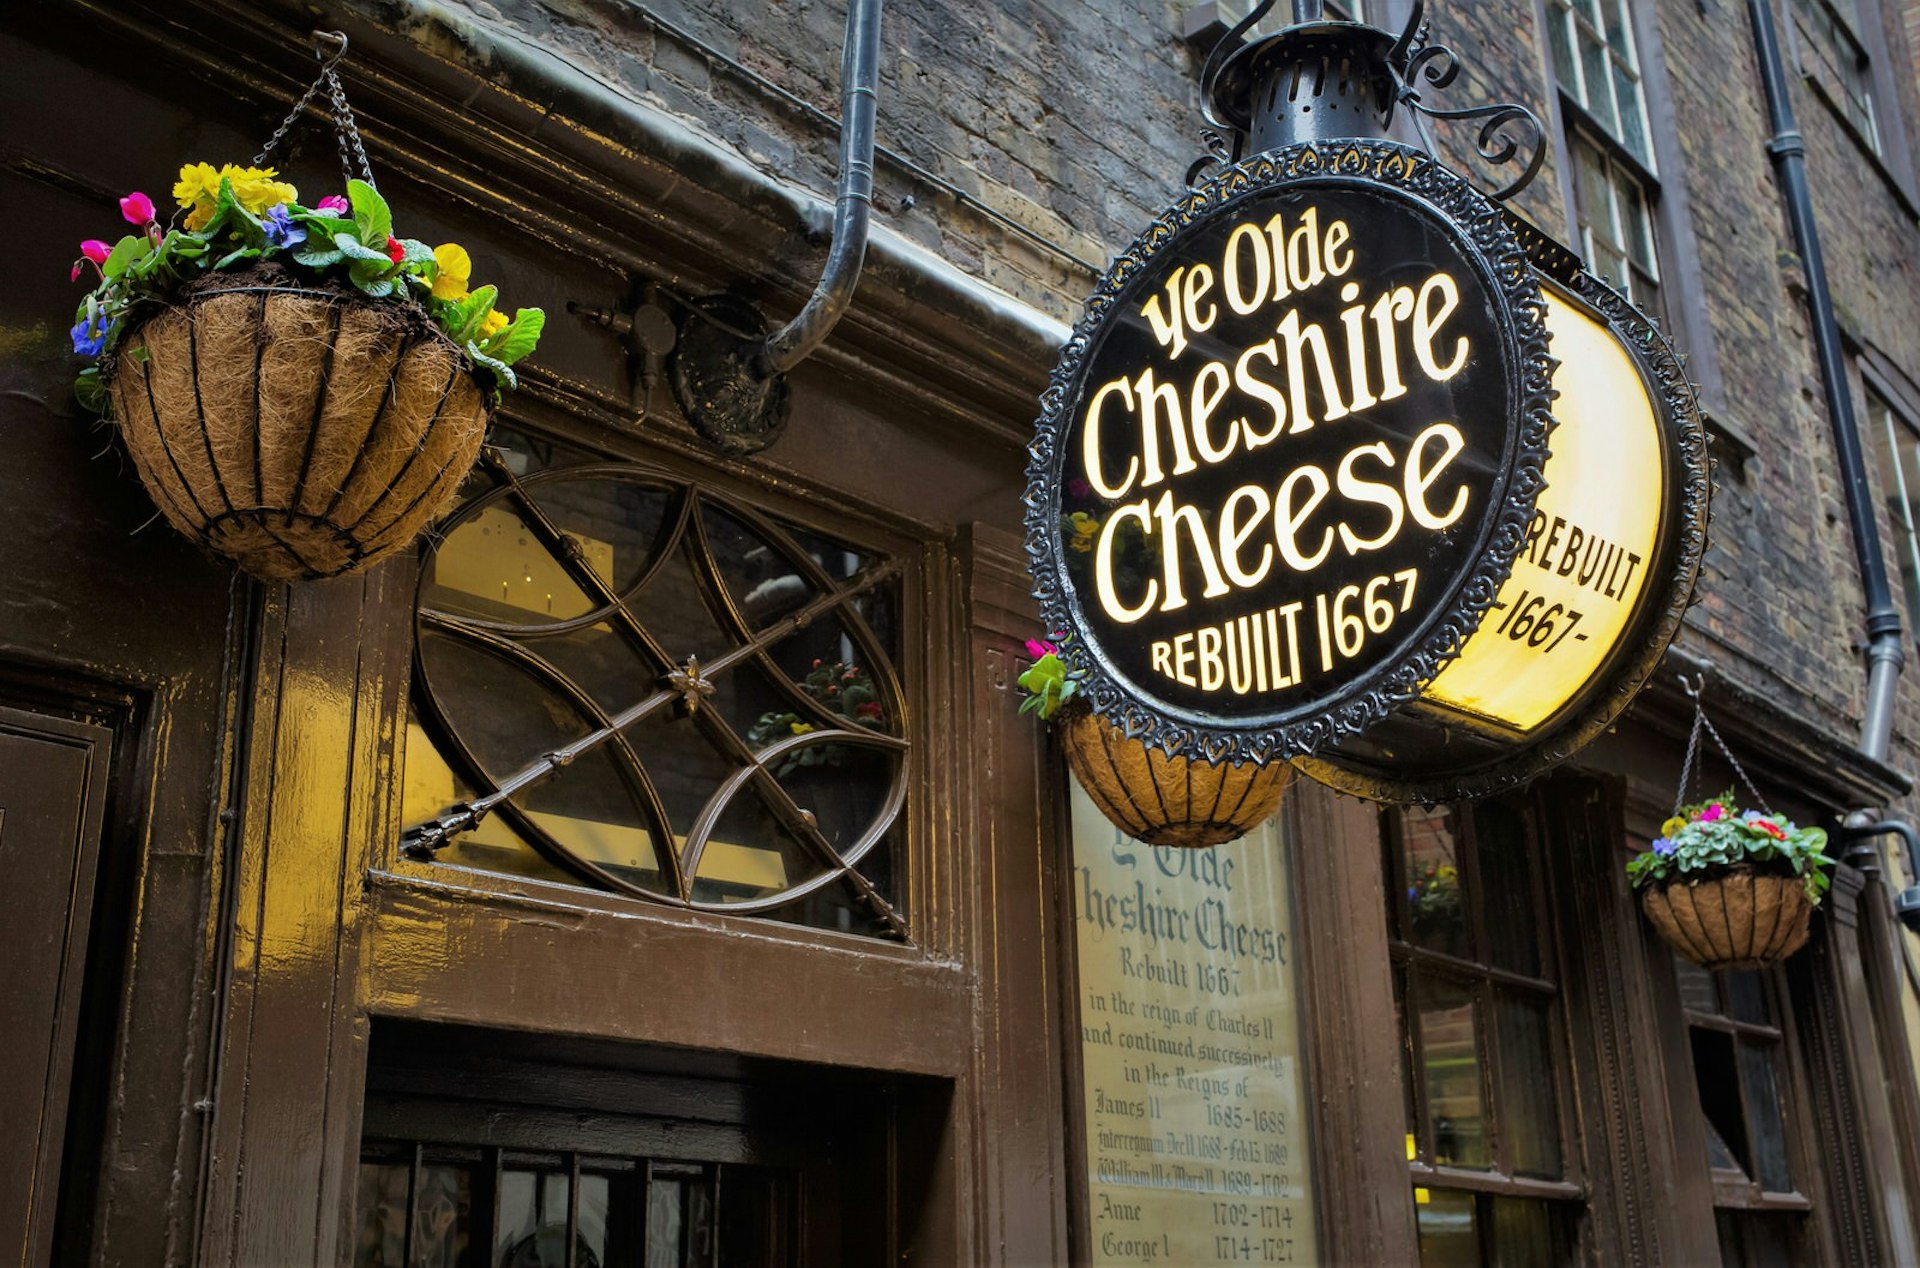 Exterior signage of Ye Olde Cheshire Cheese pub in London